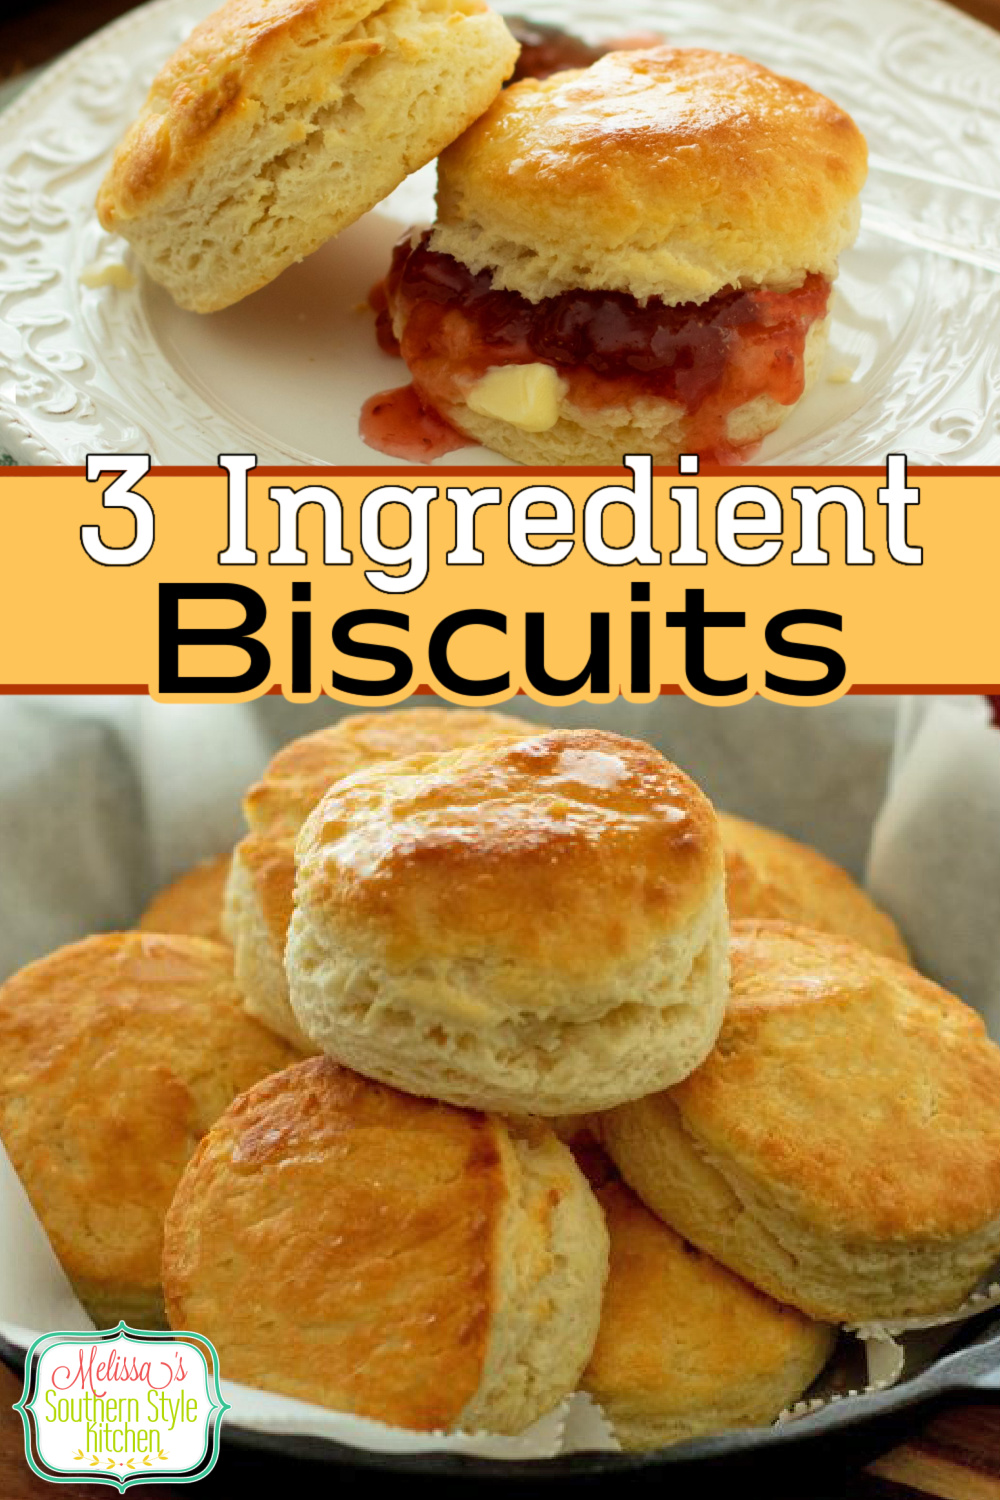 This recipe for easy 3 Ingredients Biscuits is a must-make biscuit option for any meal #threeingredientbiscuits #southernbuttermilkbiscuits #biscuitrecipes #easybiscuitrecipes #selfrisingflourbiscuits #southernbiscuitrecipe via @melissasssk